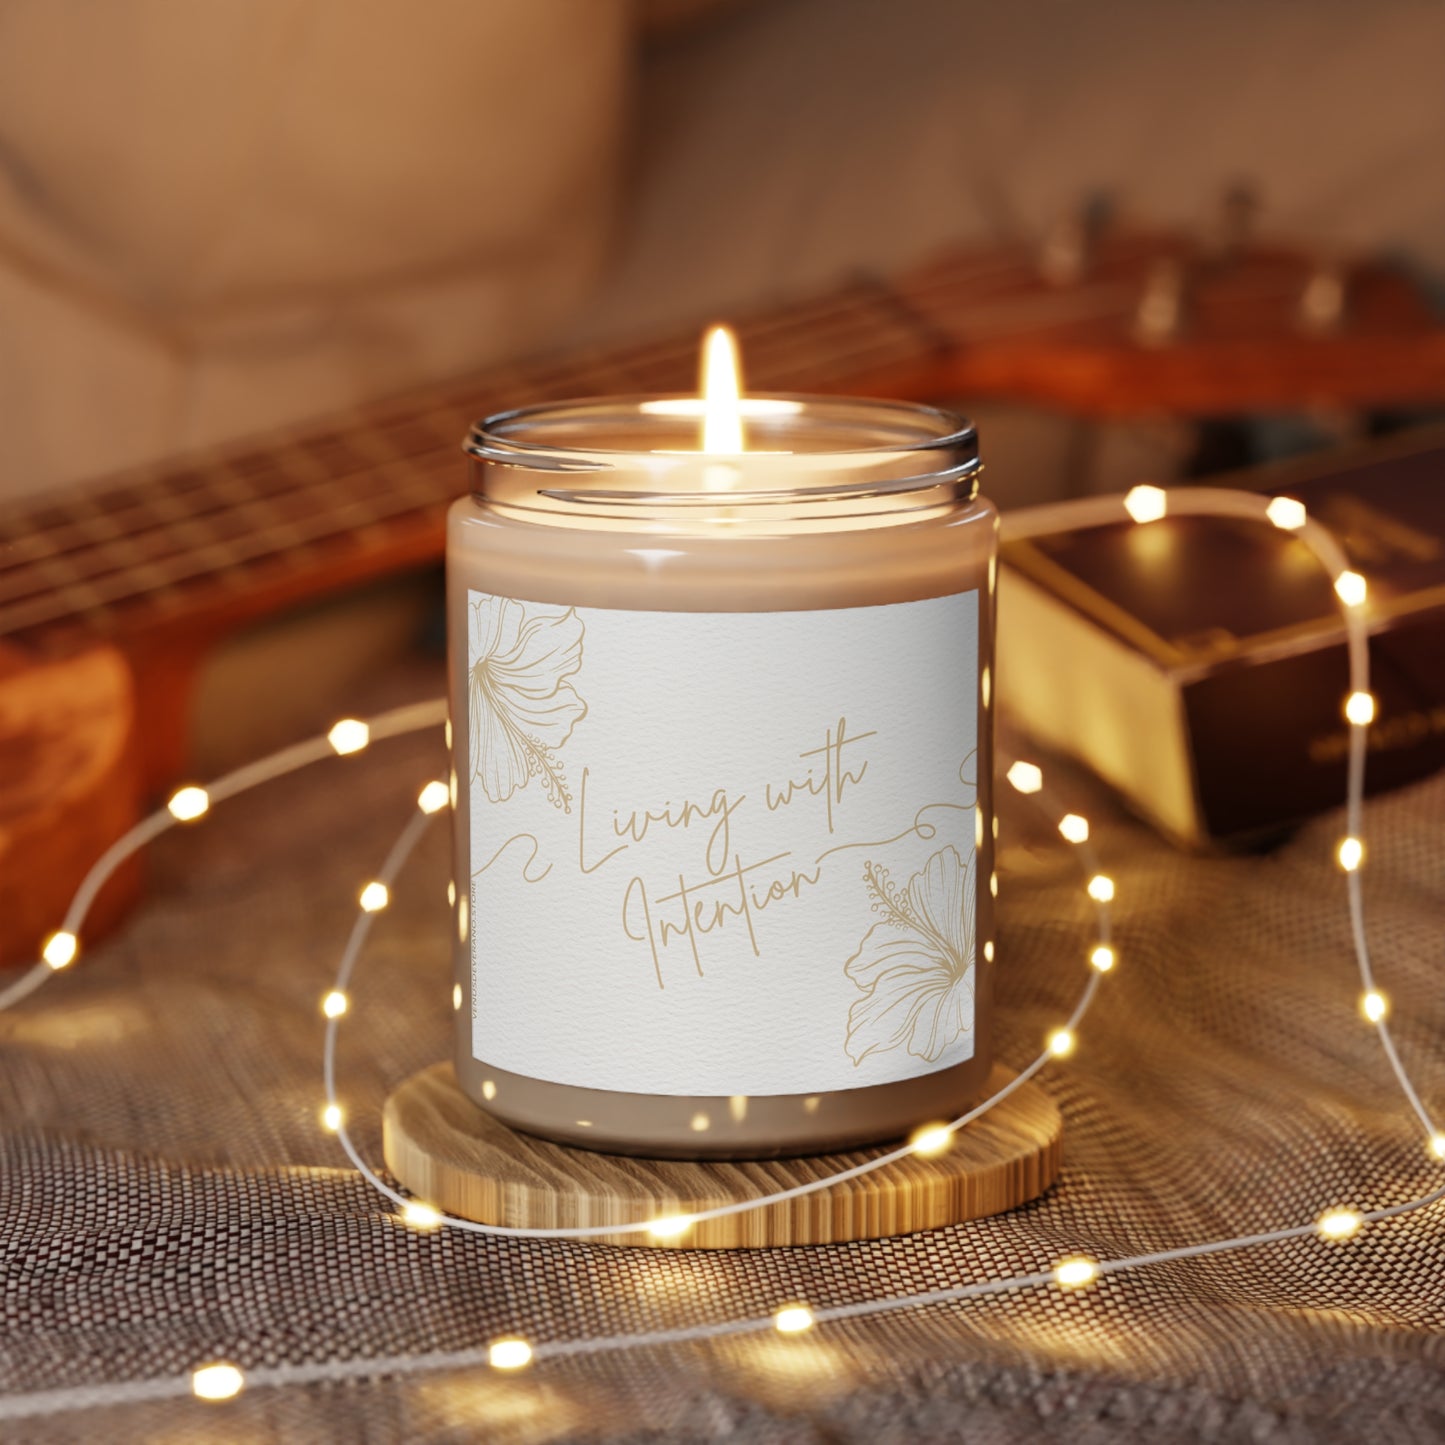 Scented Candle, 9oz - Living with INTENTION - Made from vegan soy coconut wax, hand-poured | 2 ambrosial fragrances available, Cinnamon Stick and Vanilla.